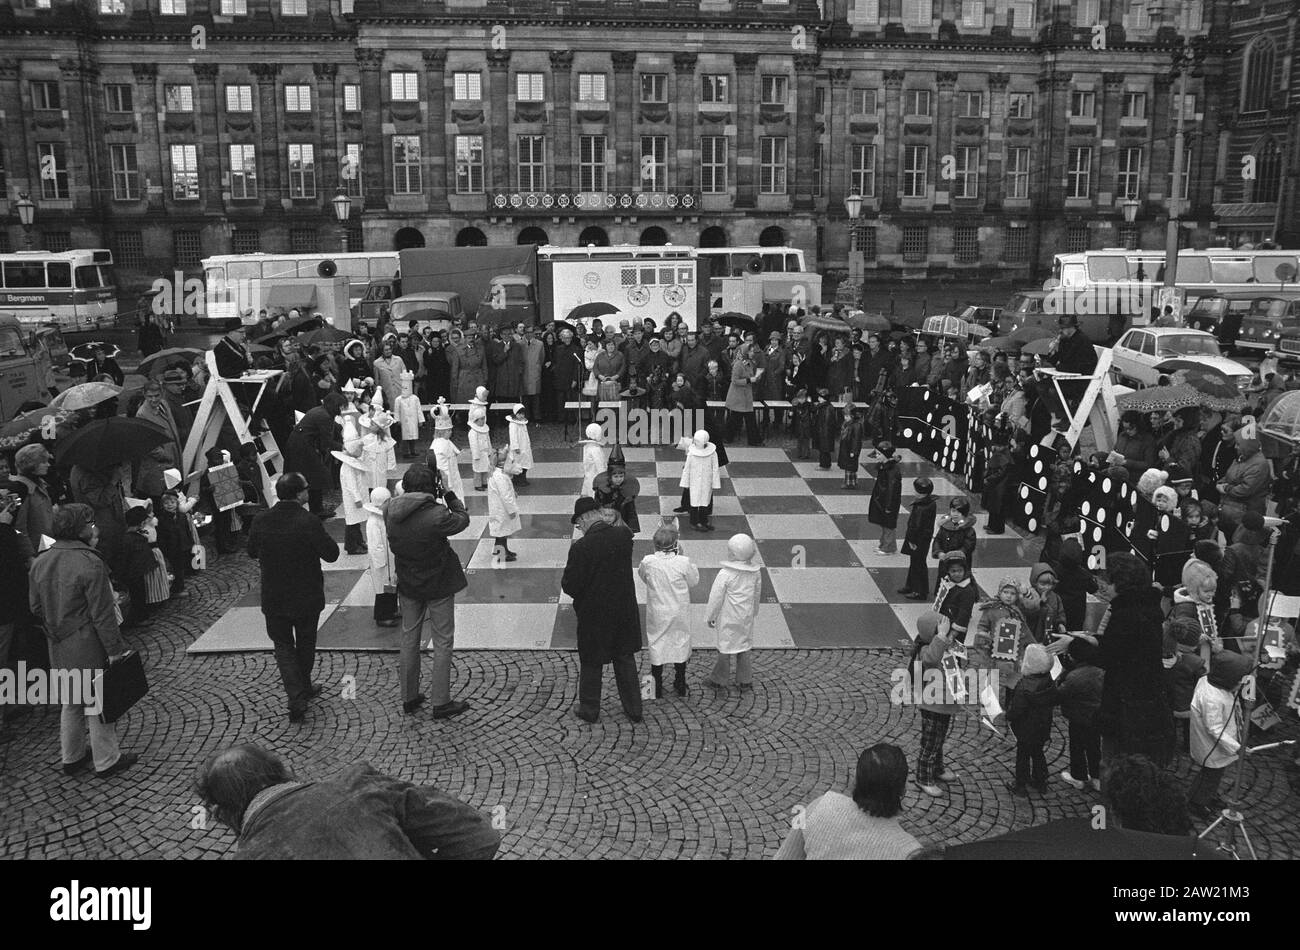 Mayor Samkalden and JH Donner playing on the Dam chess with living chess pieces related to the children's stamp action  Overview of the living schakspel Date: November 13, 1973 Location: Amsterdam, Noord-Holland Keywords : chess, chess Stock Photo